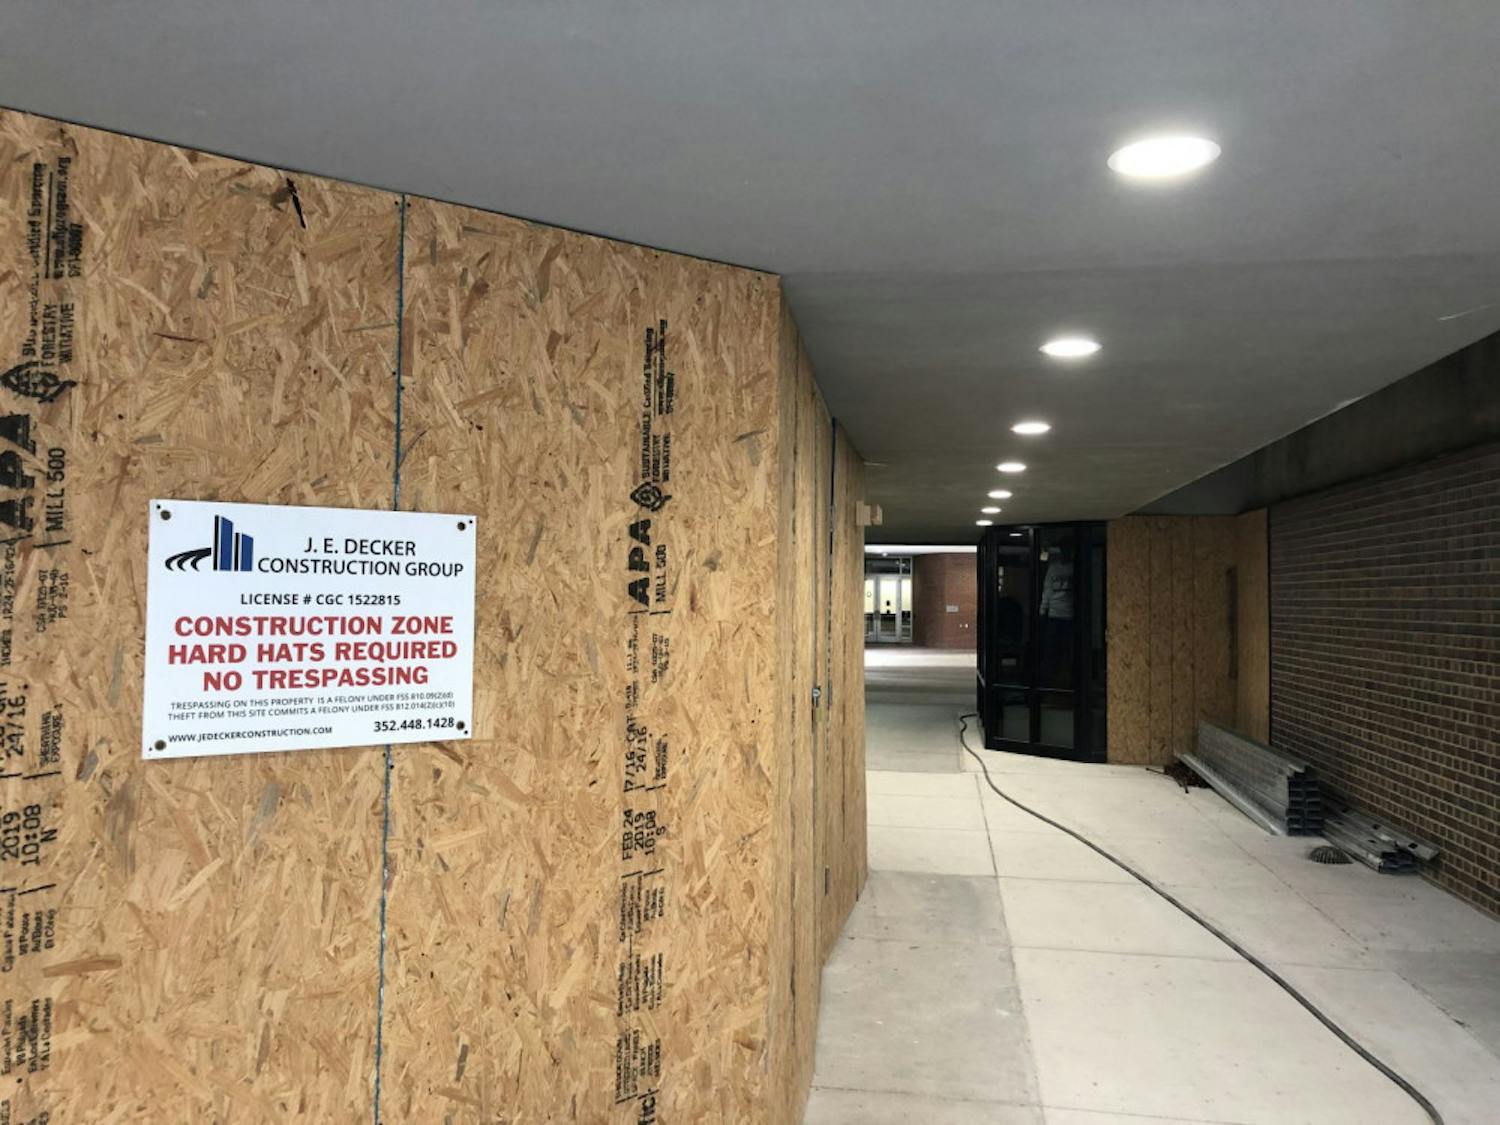 The Experiential Learning Hub (pictured here) and other parts of UF’s Levin College of Law have been under renovation since late February. The projects are expected to reopen in early August.